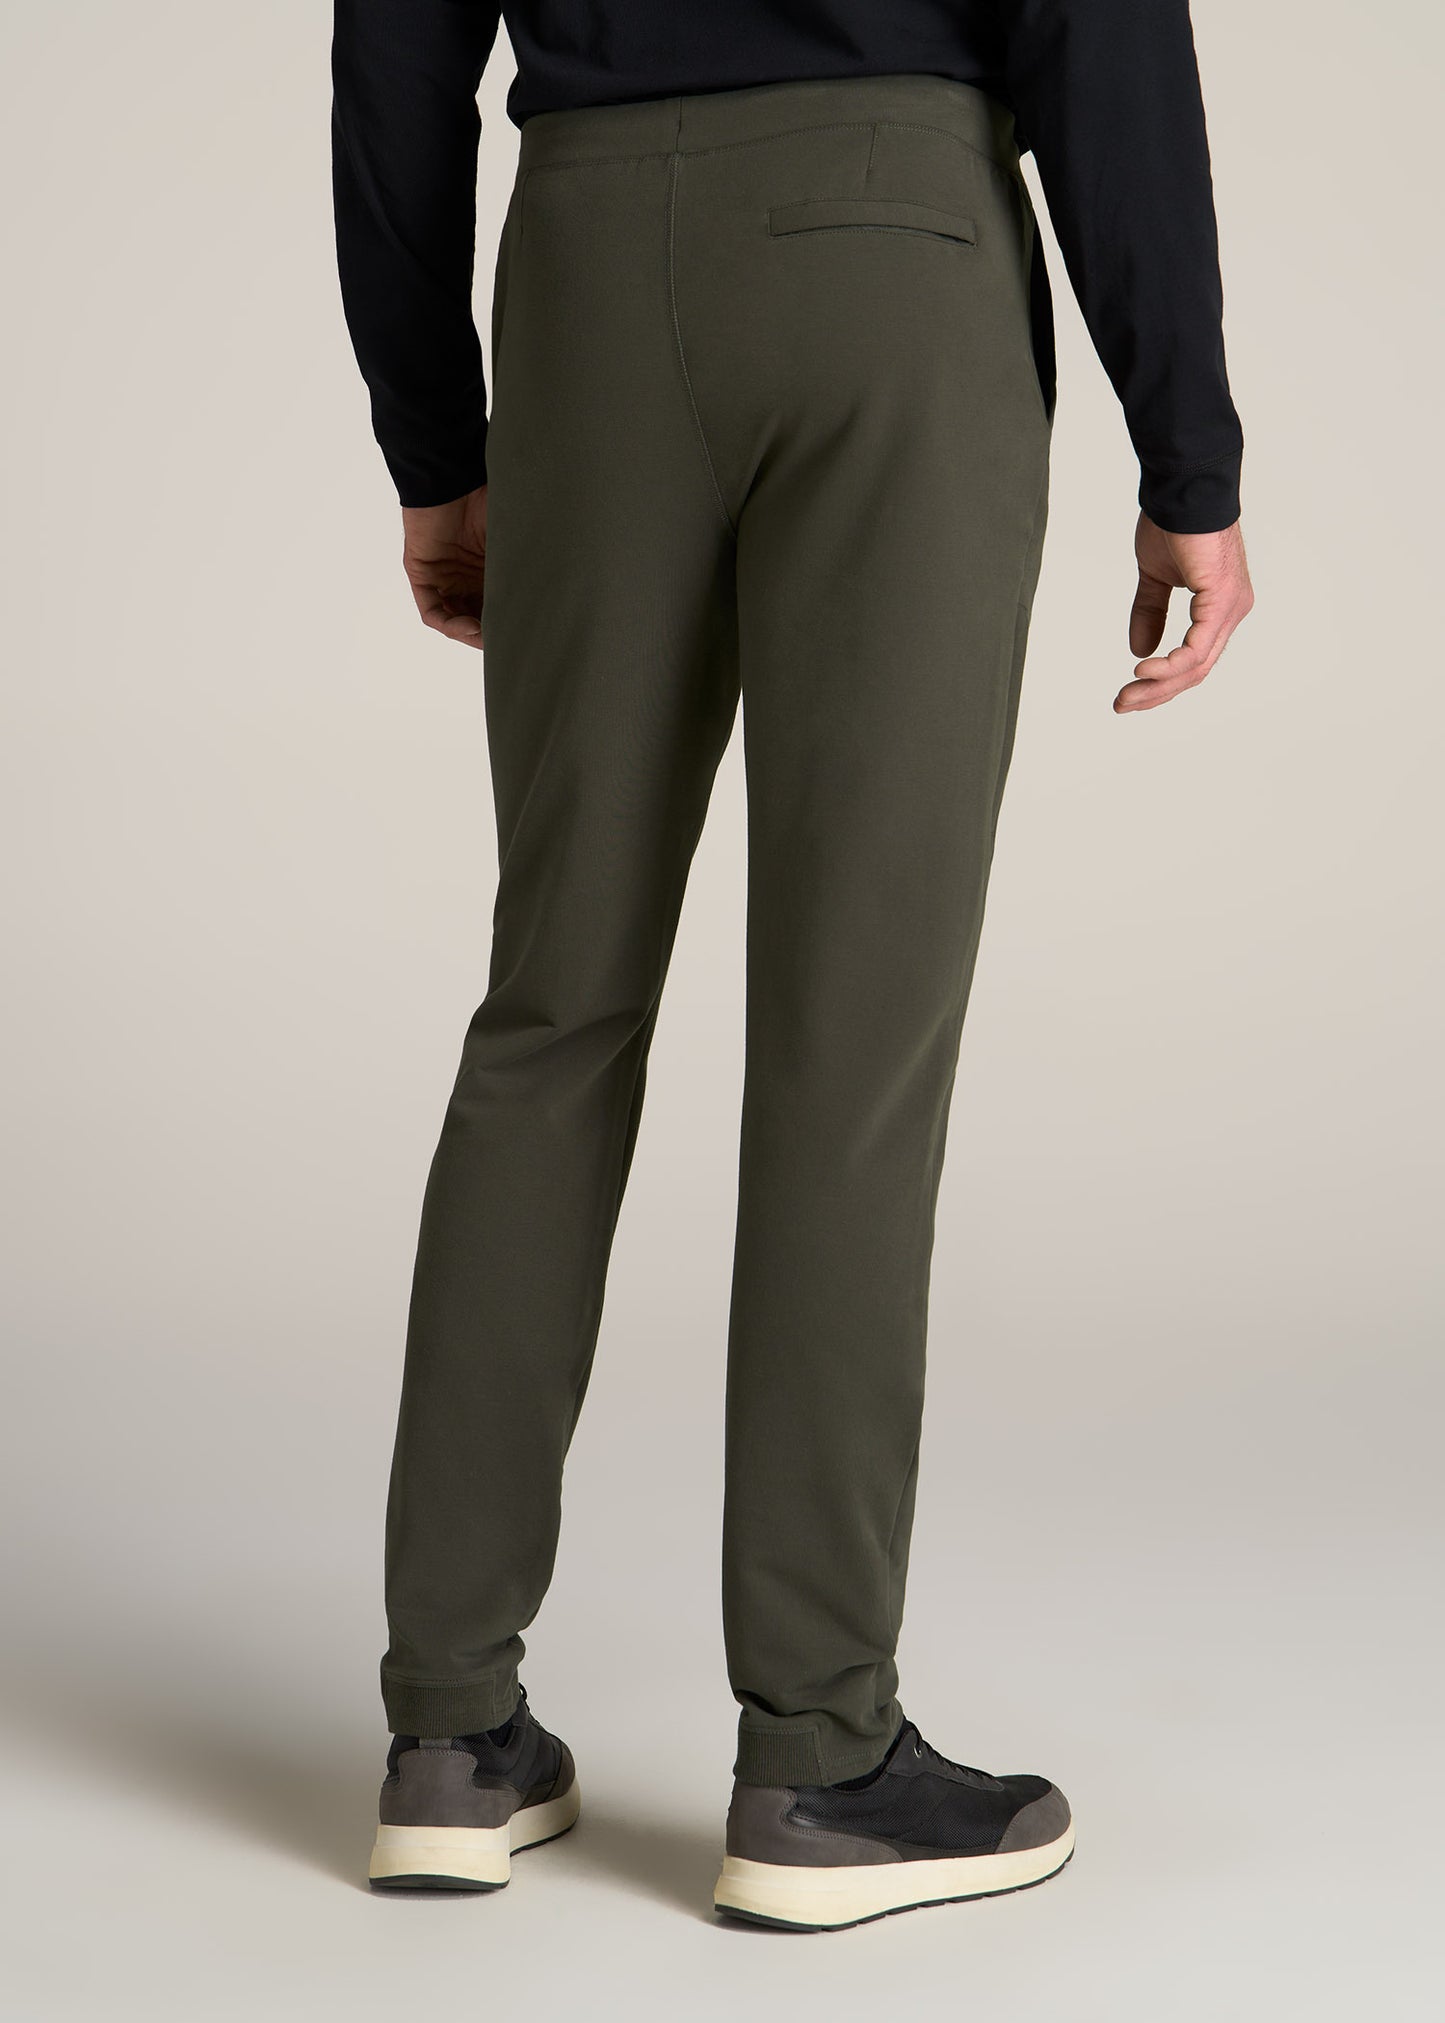 American-Tall-Men-Microsanded-French-Terry-Sweatpant-Hunter-Green-Back